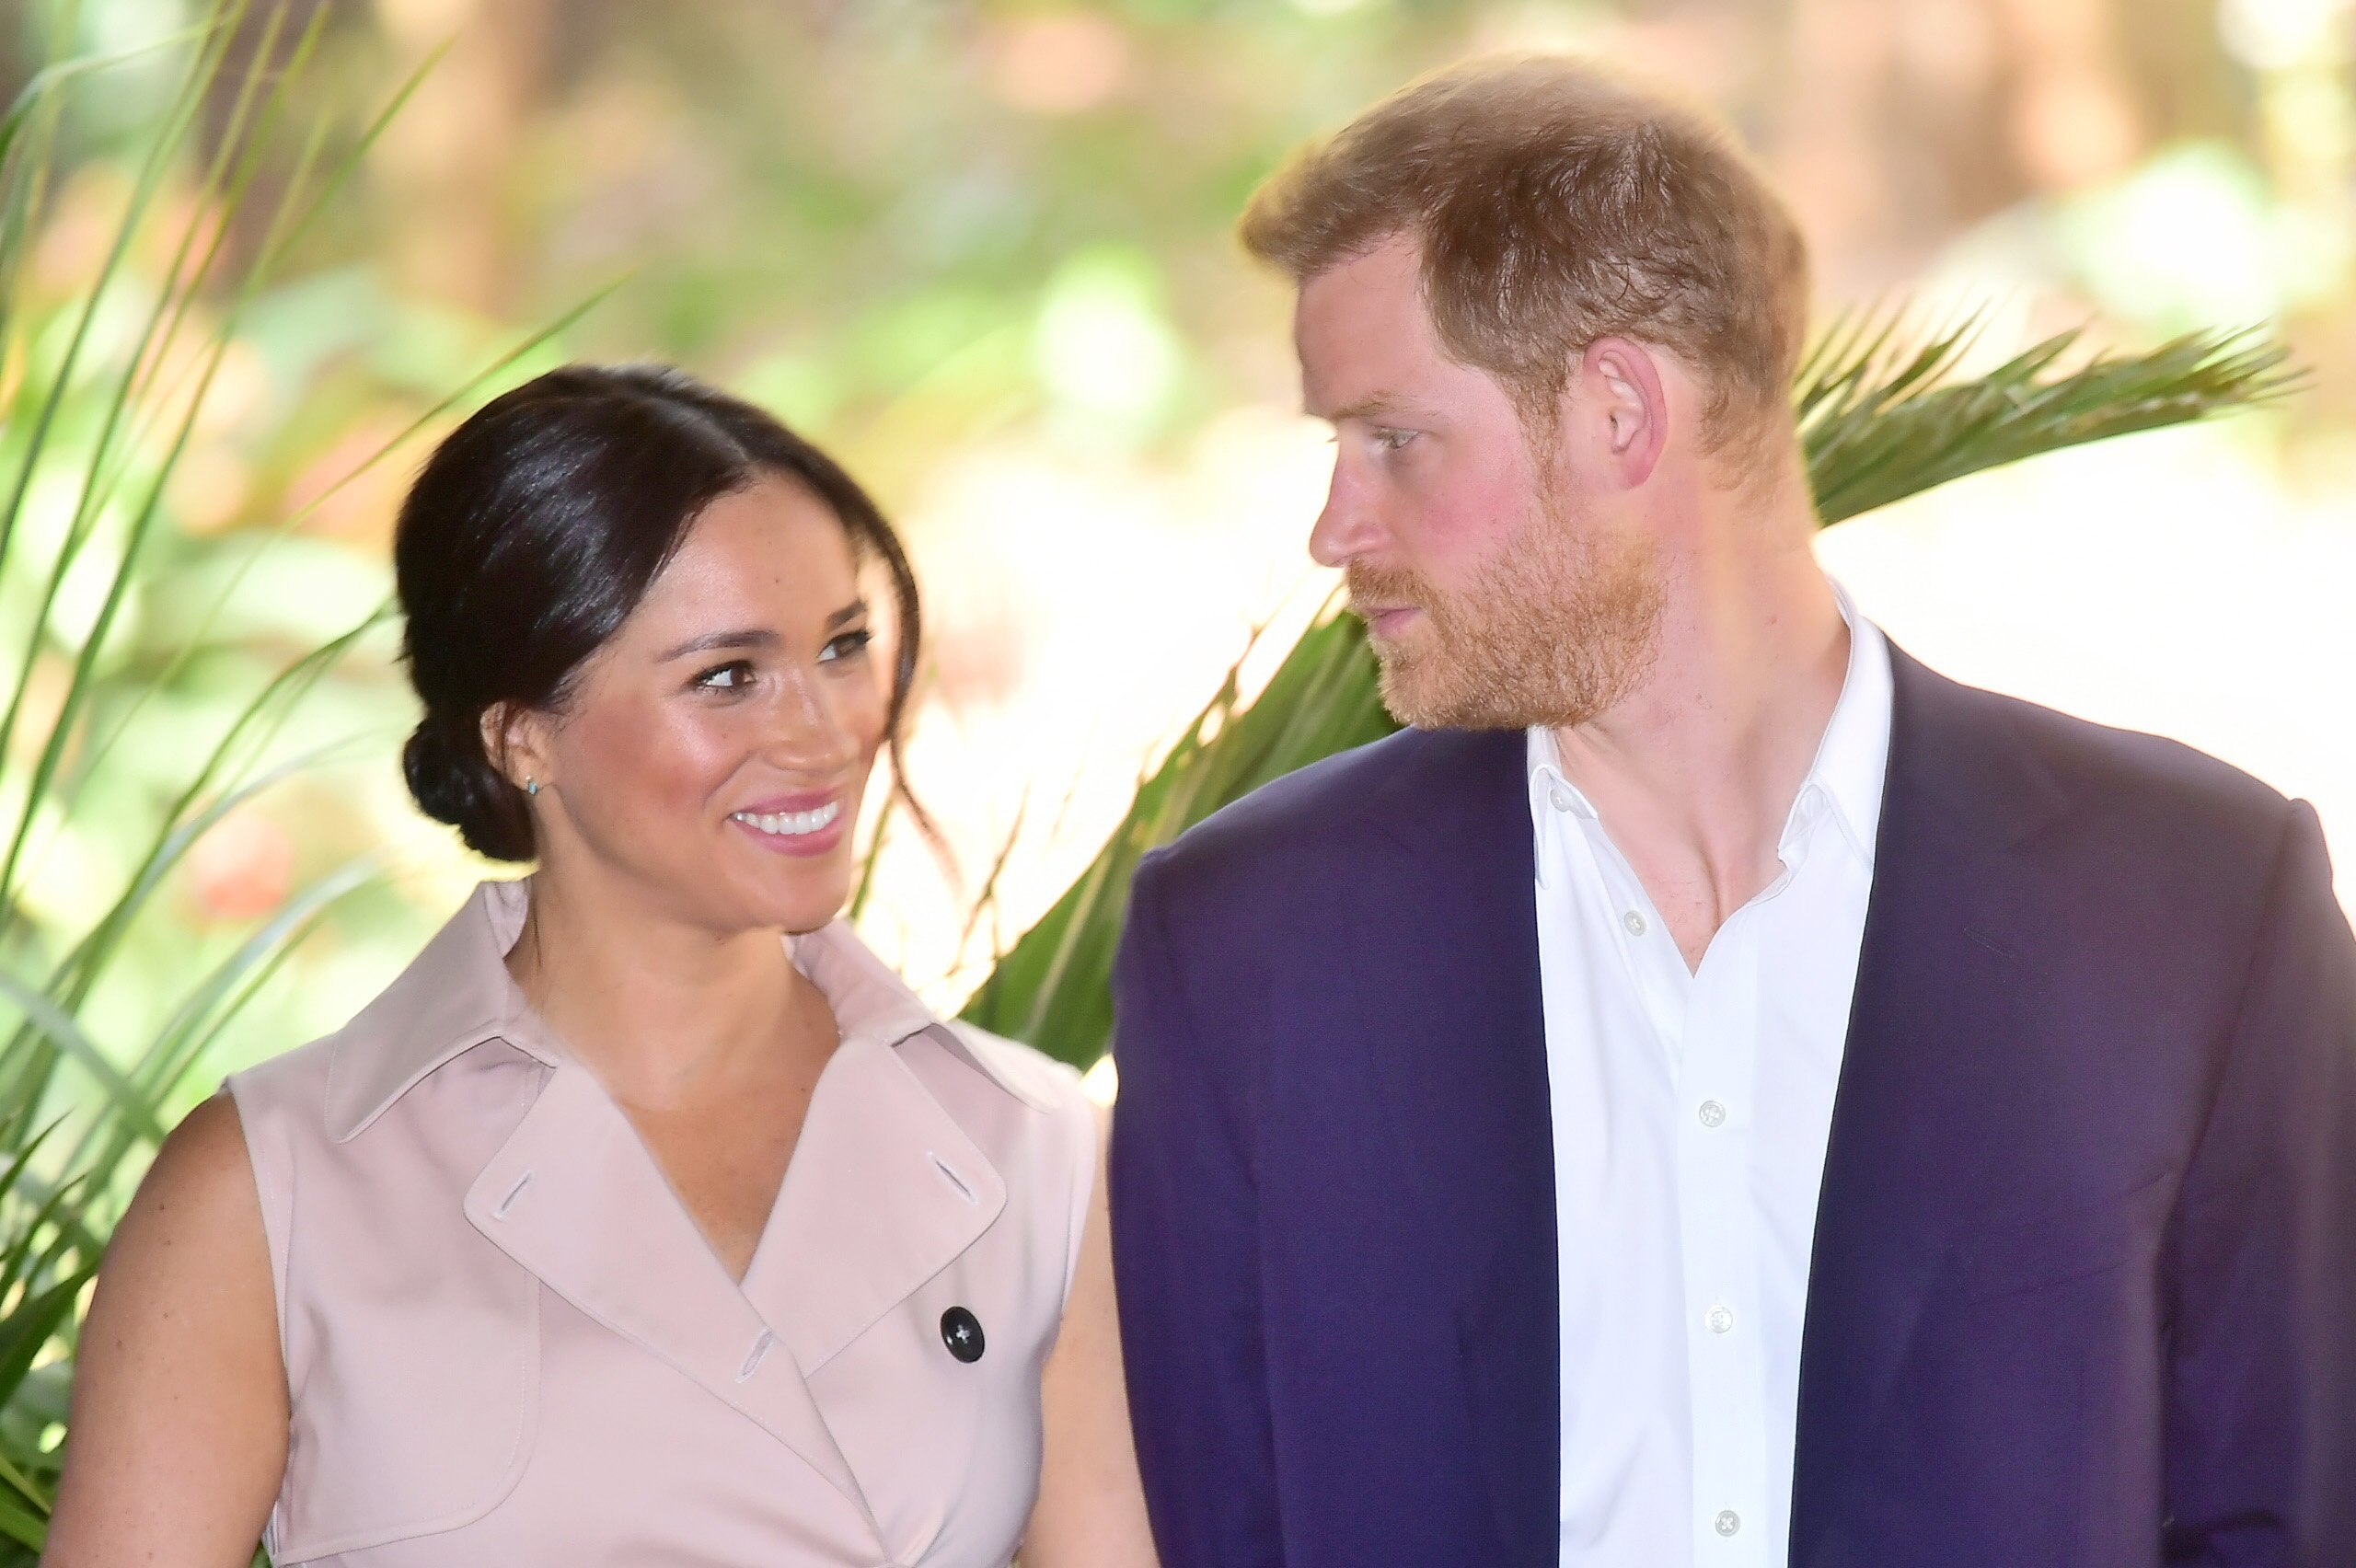 Prince Harry and Meghan Markle, who the duke's former flame says has 'a spell' on him, visit the British High Commissioner's residence during their tour in South Africa